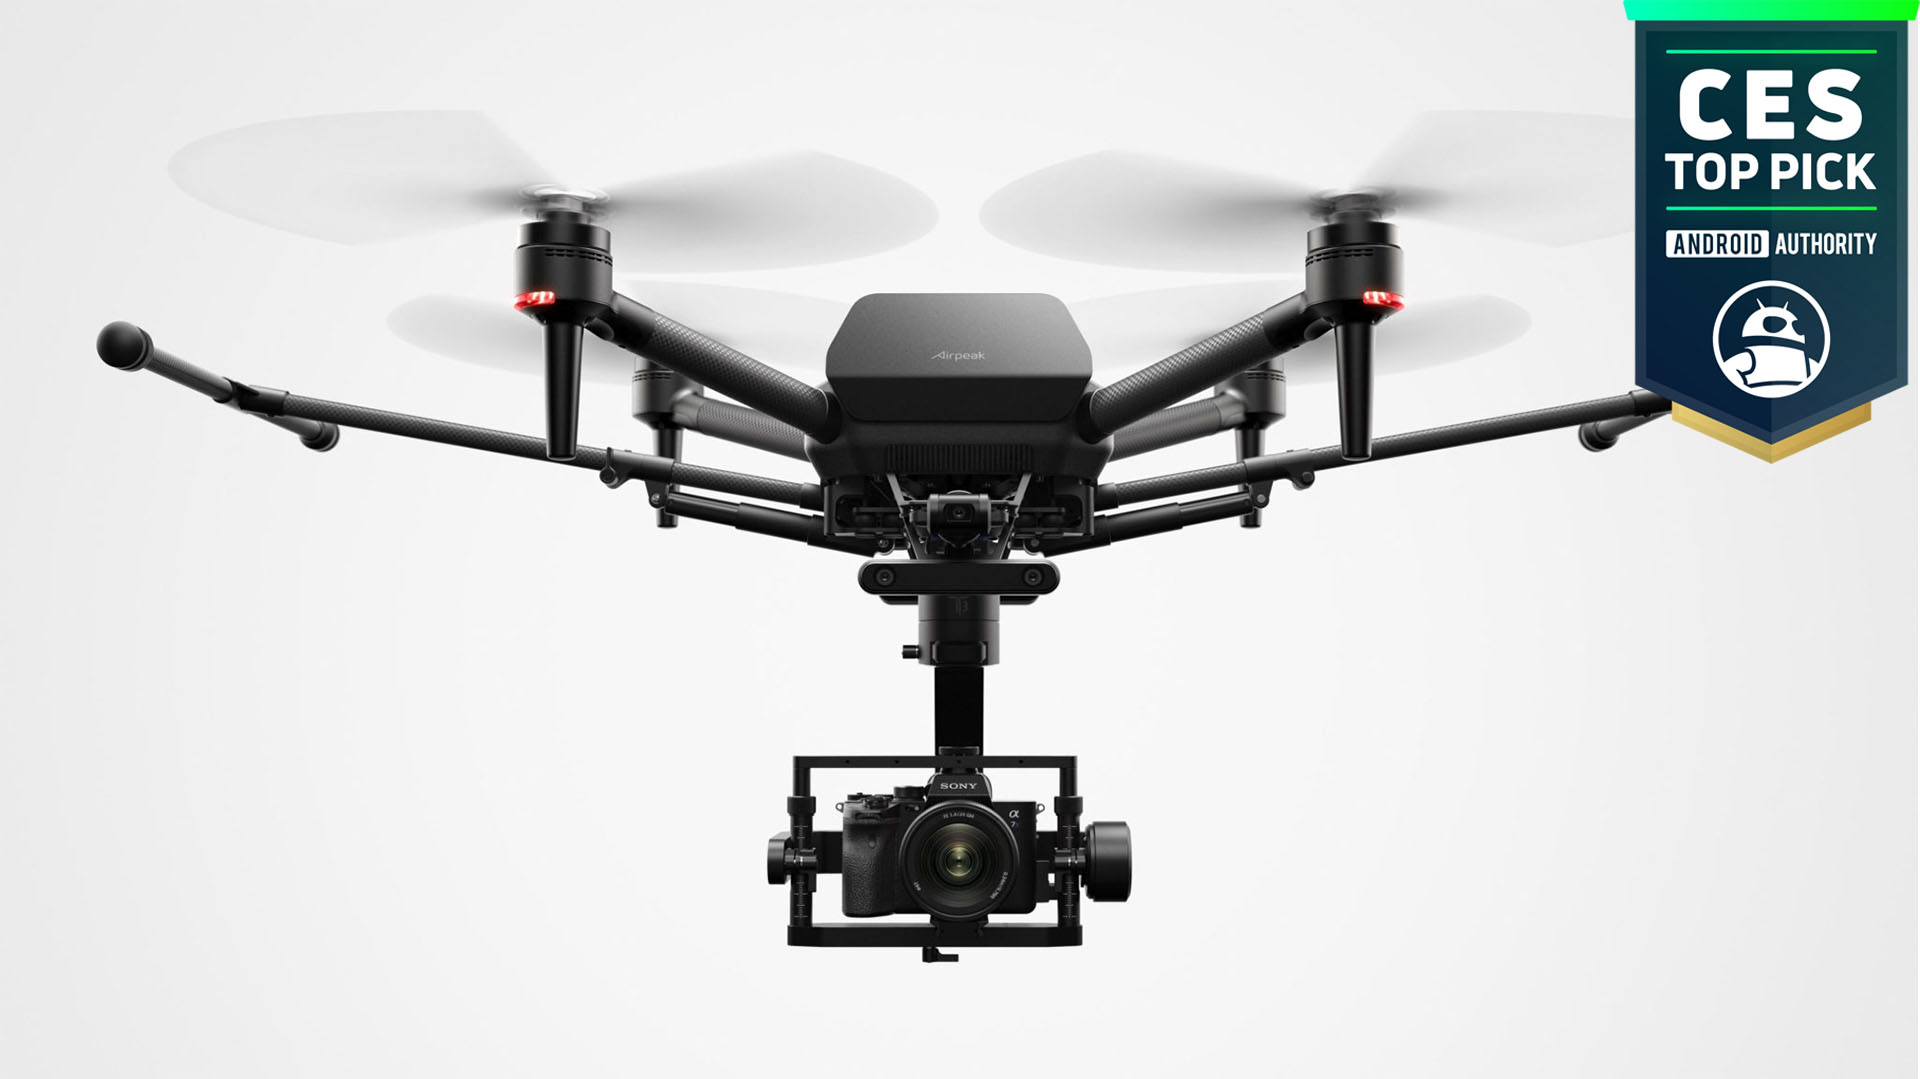 Sony Airpeak drone CES 2021 Top Pick Award